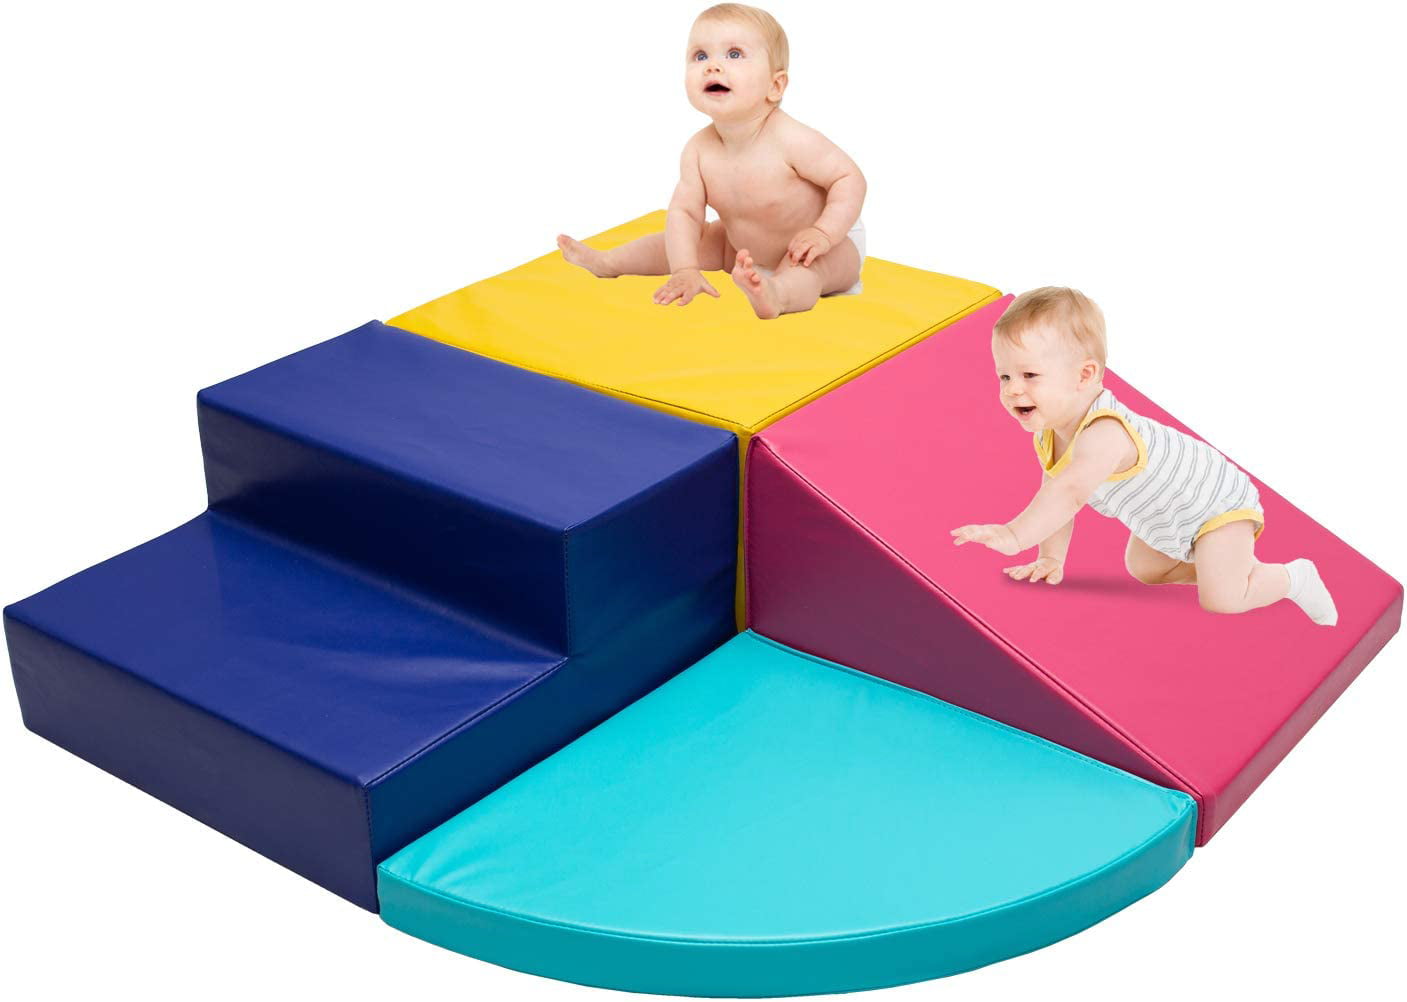 4 Pieces Soft Foam Playset for Toddlers and Preschoolers Crawling and Sliding Climb and Crawl Activity Play Set,Safe Odorless Foam Shapes for Climbing 4 Piece 